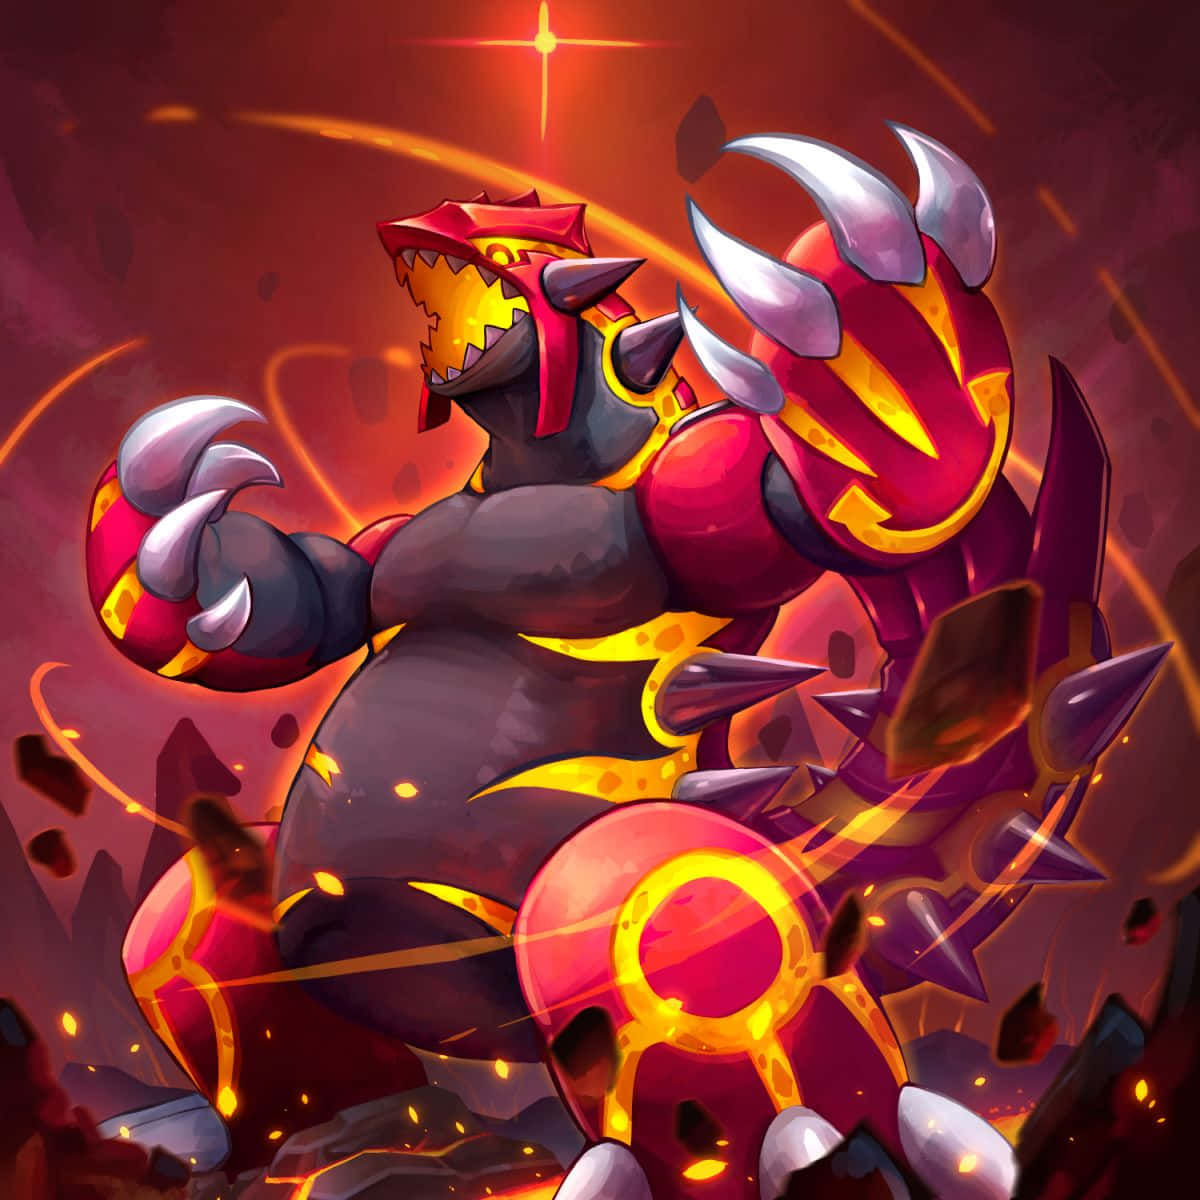 Download Primal Groudon With Fire Near Body Wallpaper | Wallpapers.com